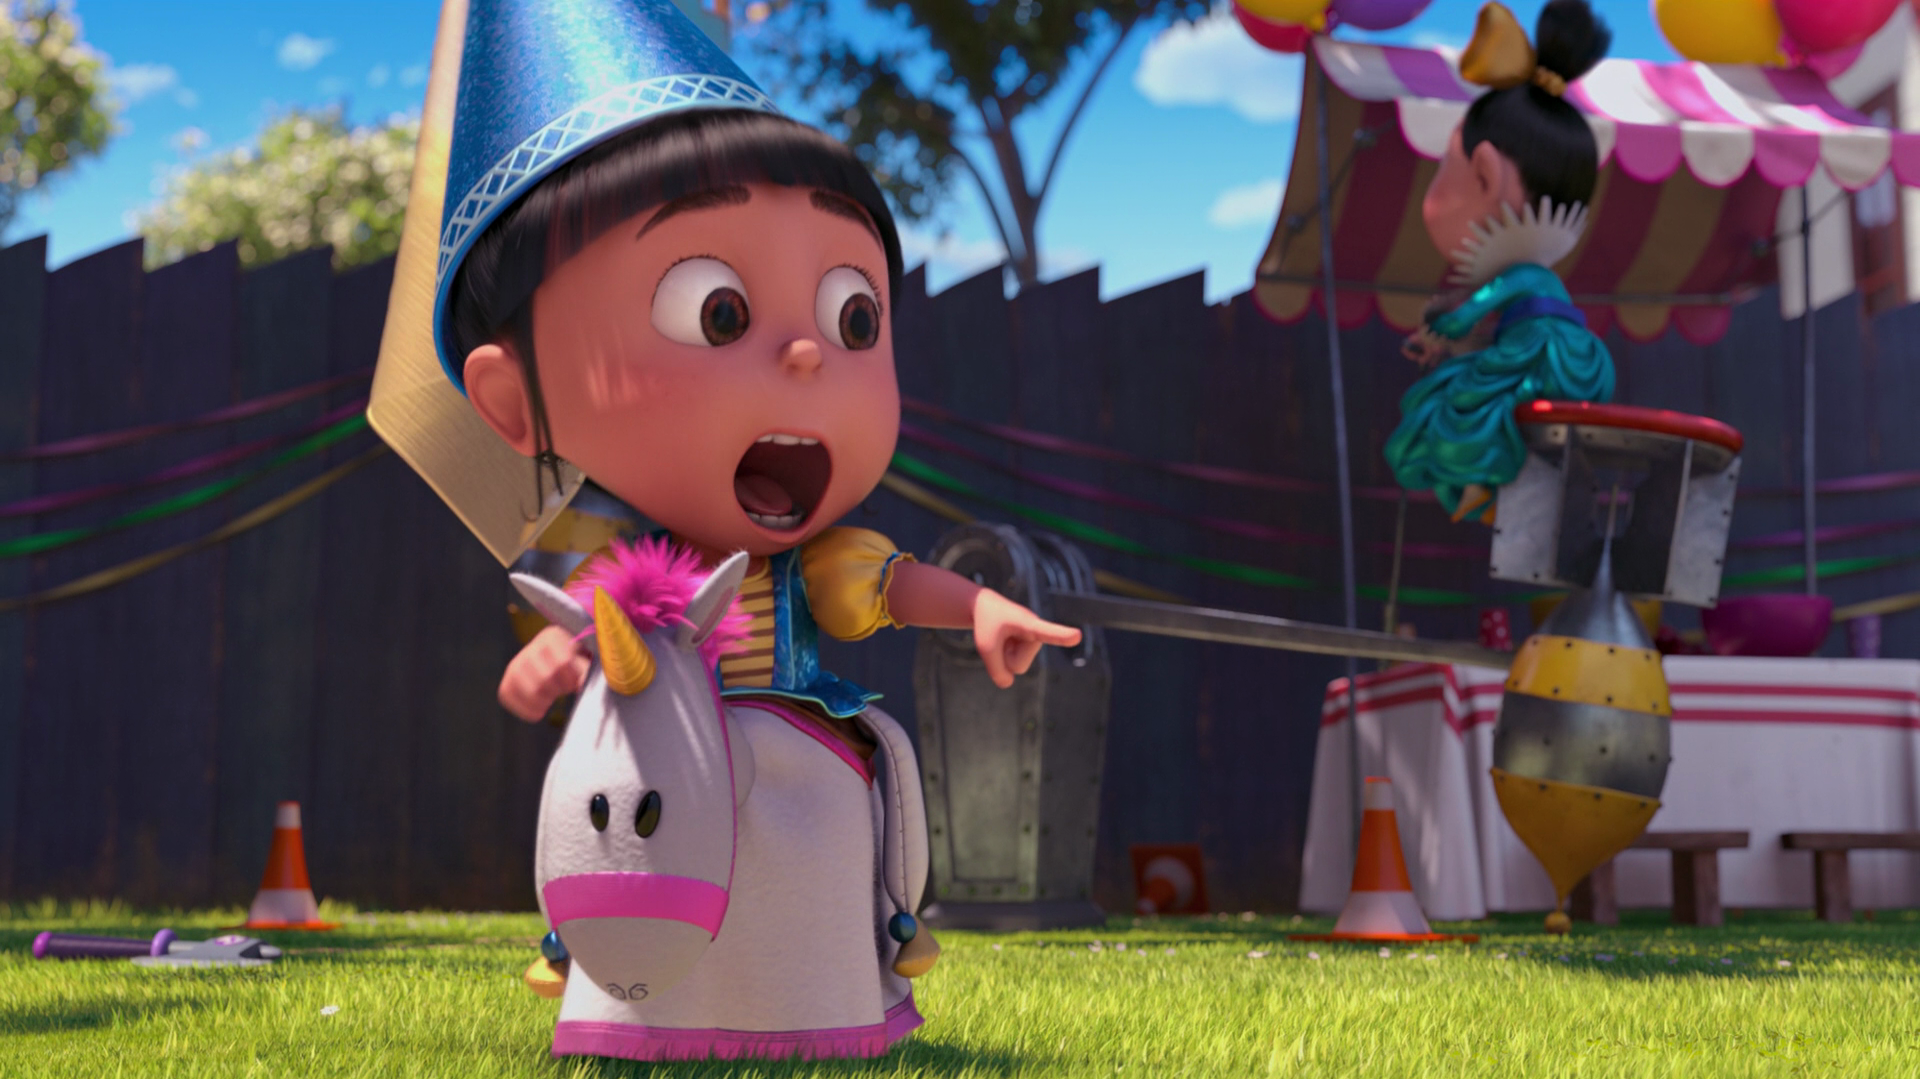 218994 1920x1080 Agnes Despicable Me   Rare Gallery HD Wallpapers